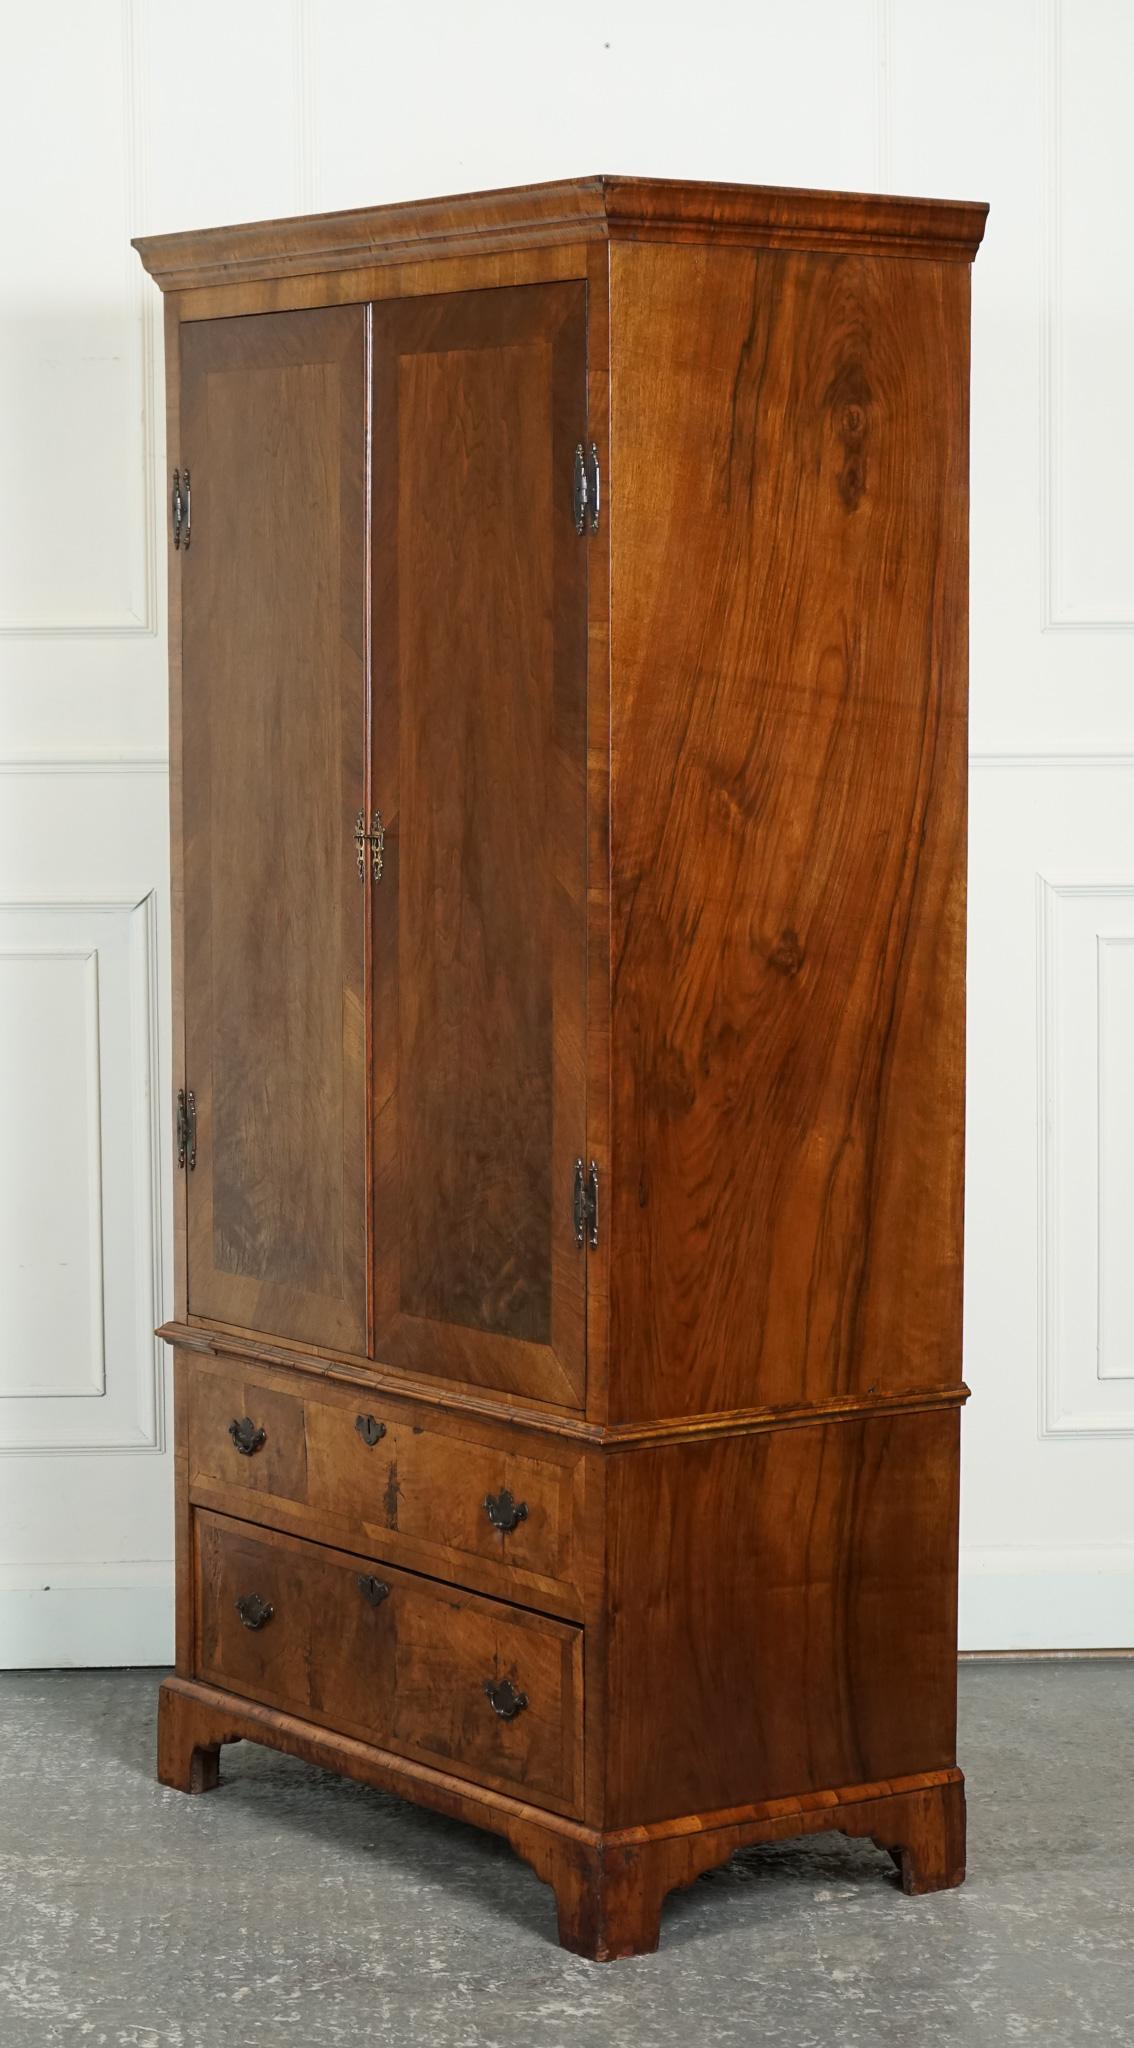 
We are delighted to offer for sale this Lovely Wardrobe.

An antique linen press that has been converted into a wardrobe with original brass handles is a unique and stylish furniture piece that combines history with functionality. A linen press is